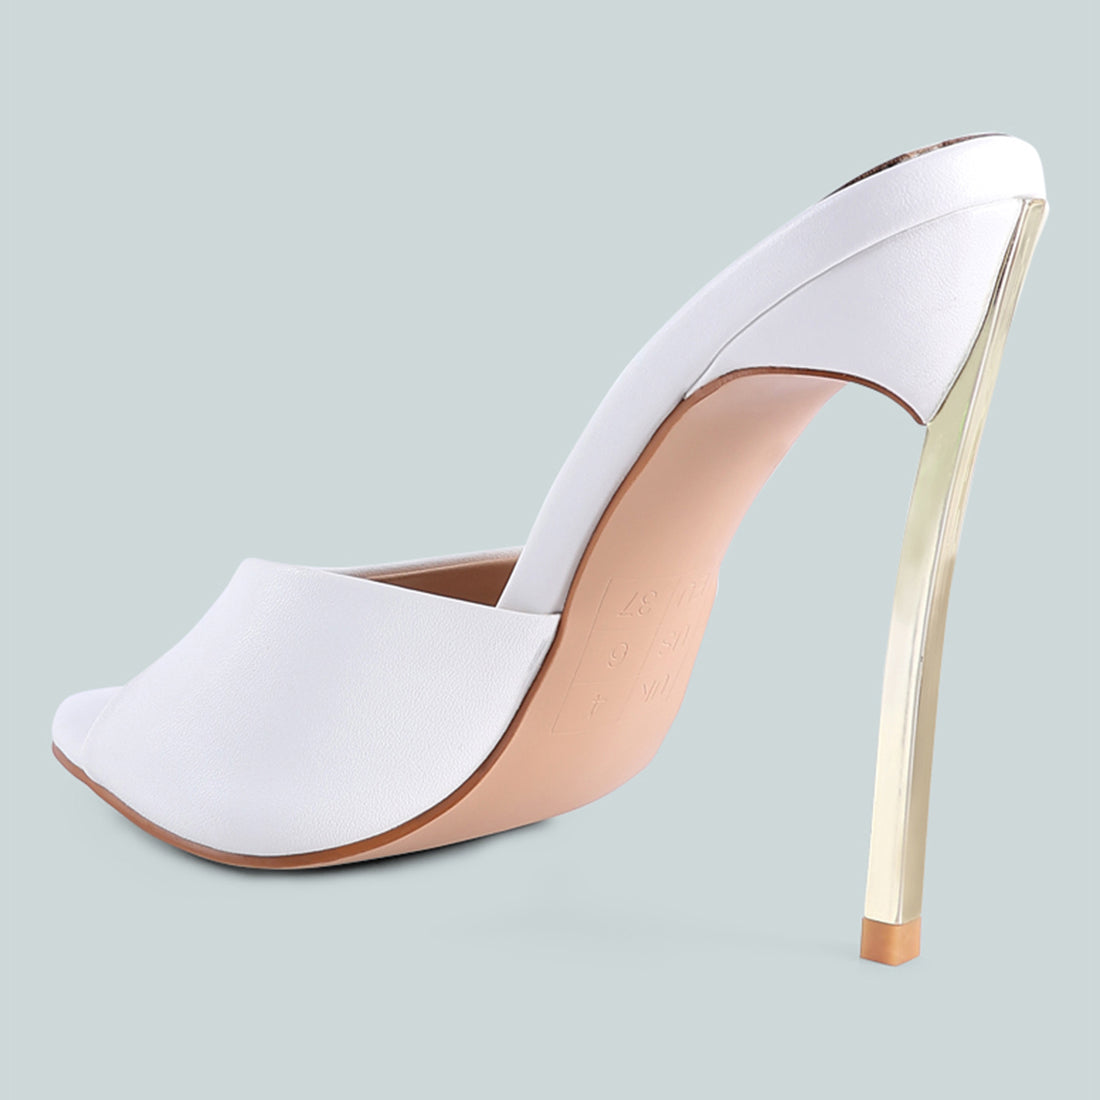 High Heeled Sliders Sandals in White